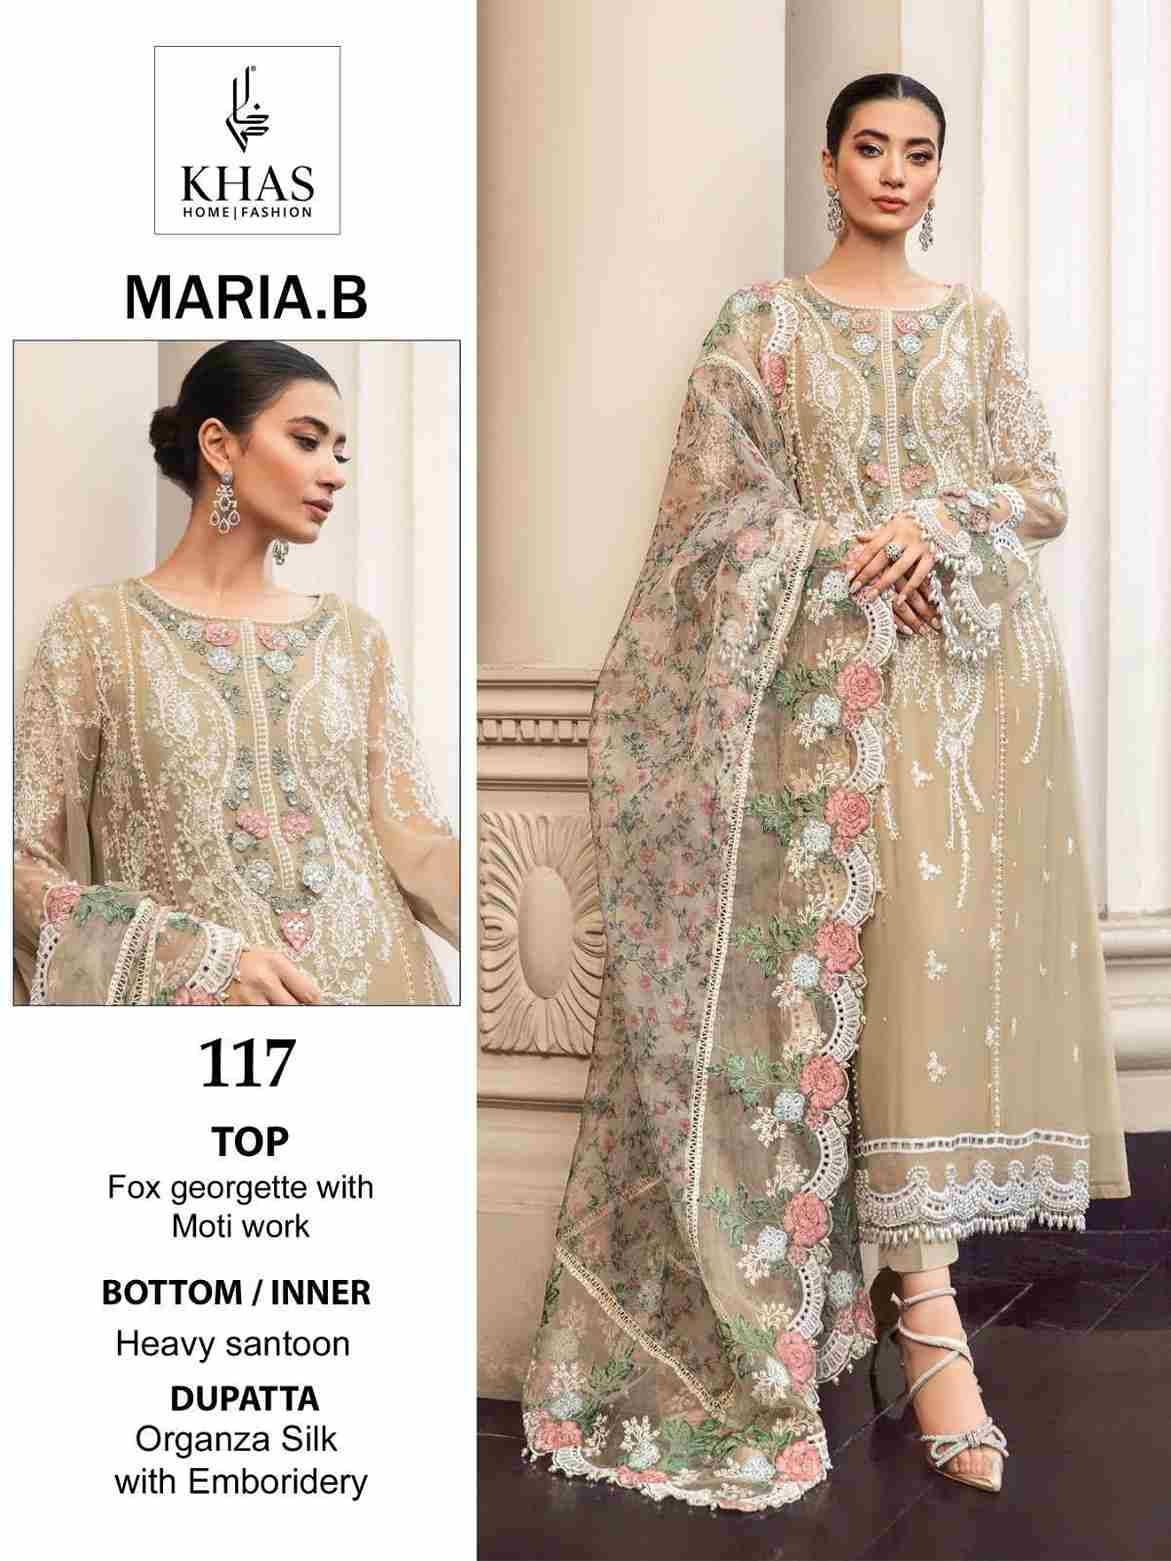 Maria.B By Khas 117 To 119 Series Beautiful Pakistani Suits Colorful Stylish Fancy Casual Wear & Ethnic Wear Faux Georgette Dresses At Wholesale Price